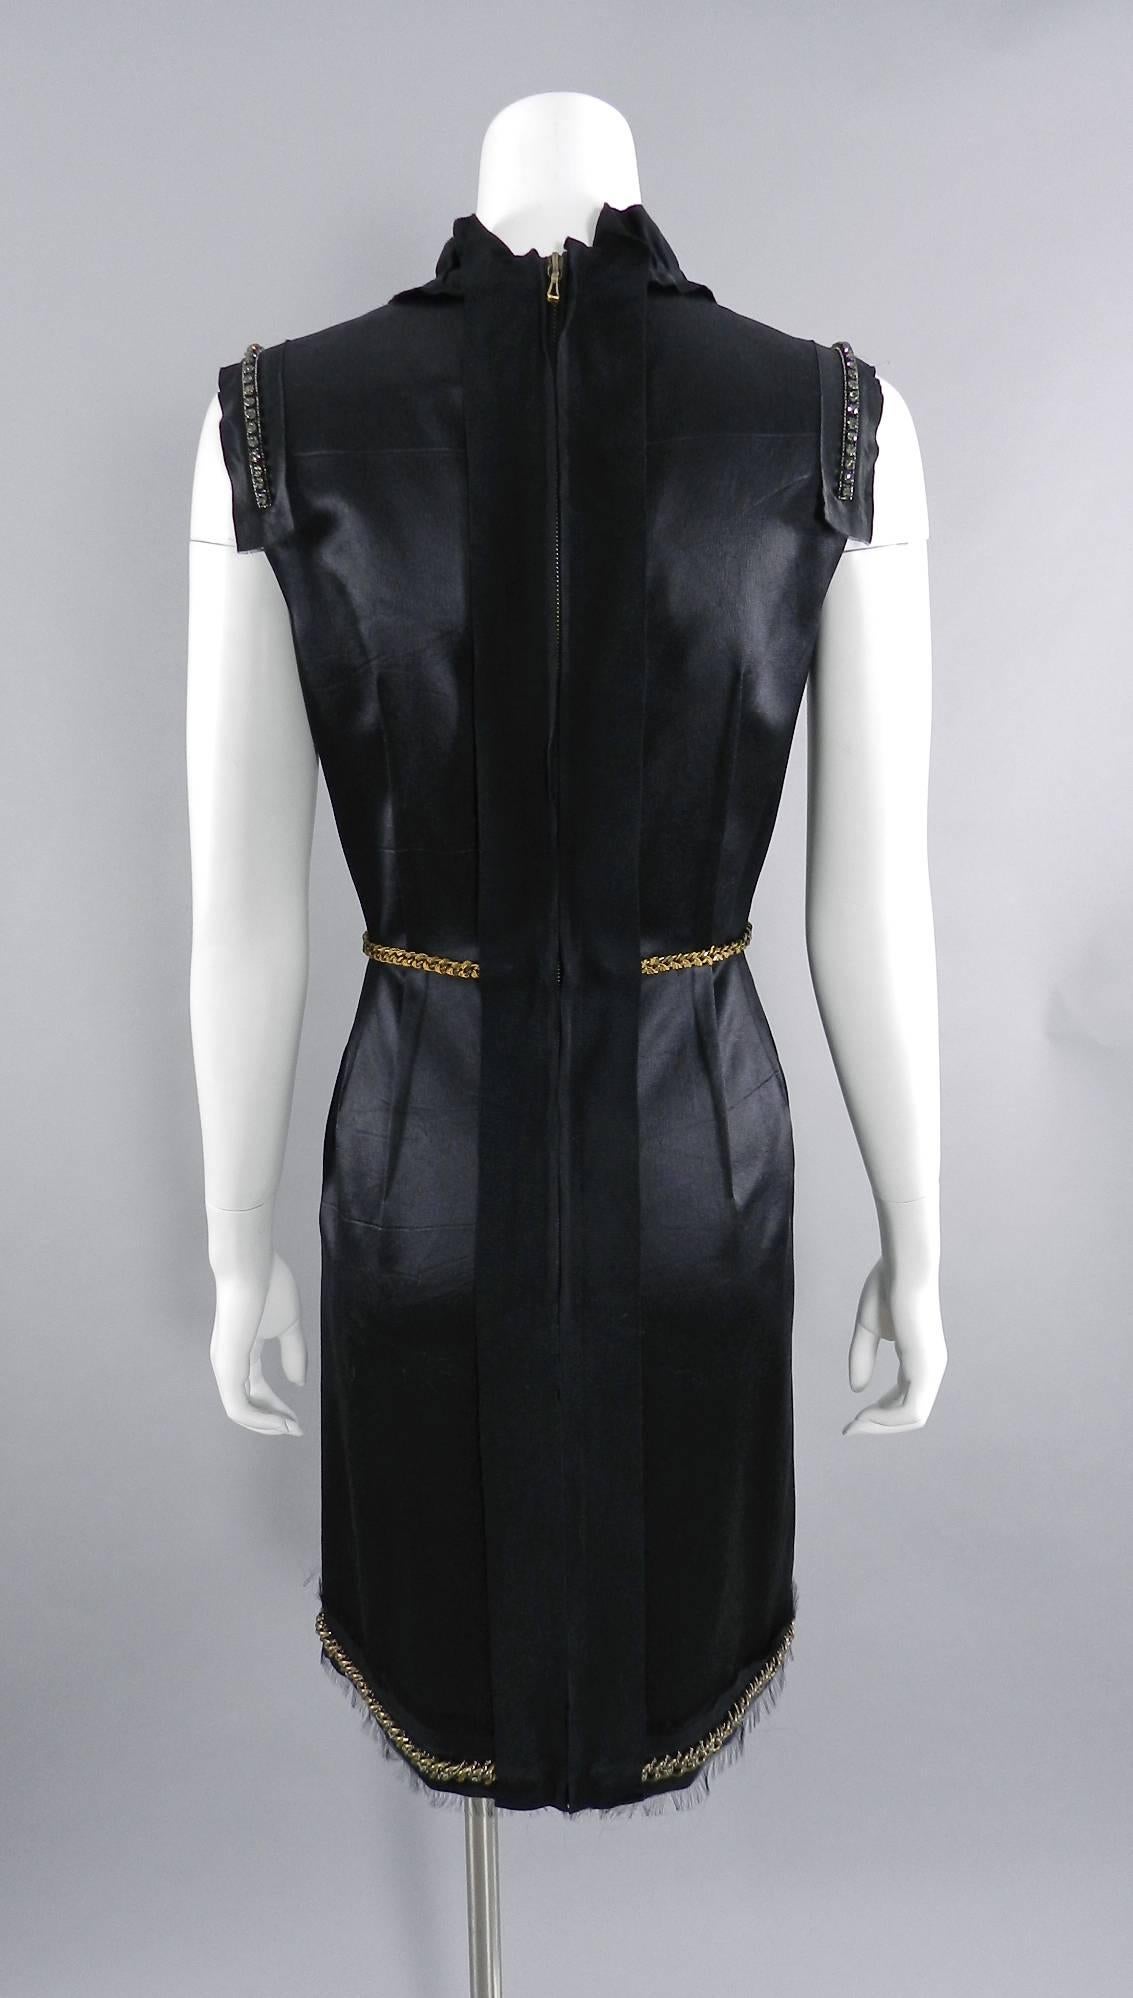 Women's Lanvin Black Satin Cocktail Dress with Pearls and Chains